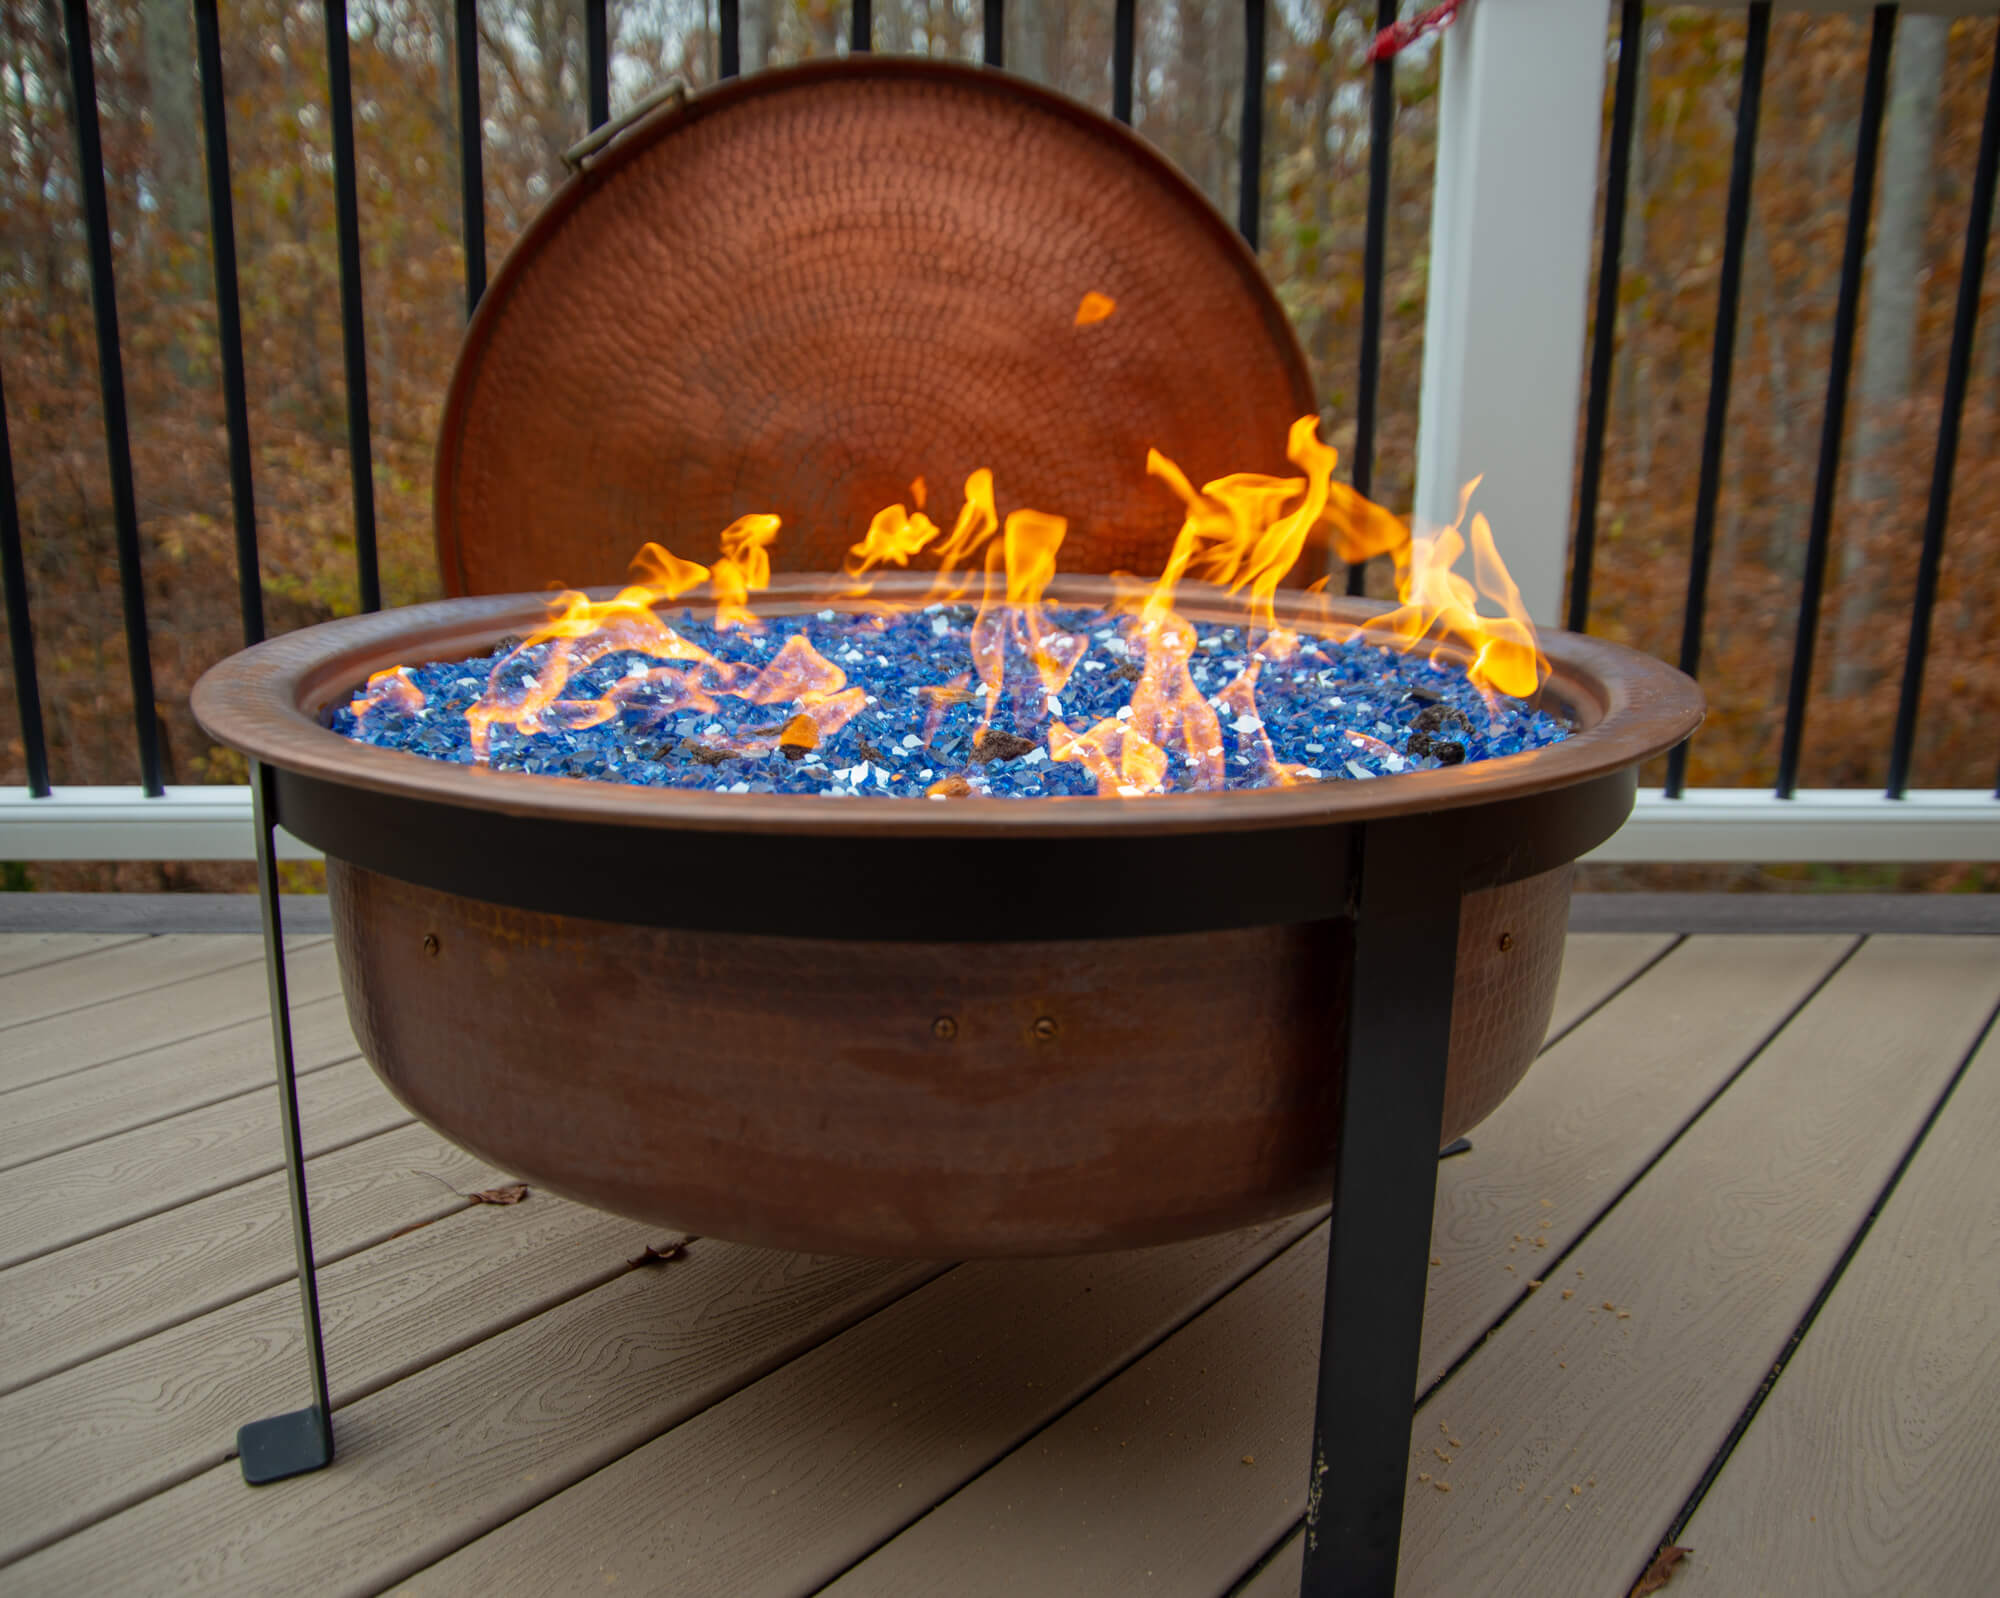 6 Ways To Put A Fire Pit On Wooden Deck, How To Install Gas Fire Pit On Deck